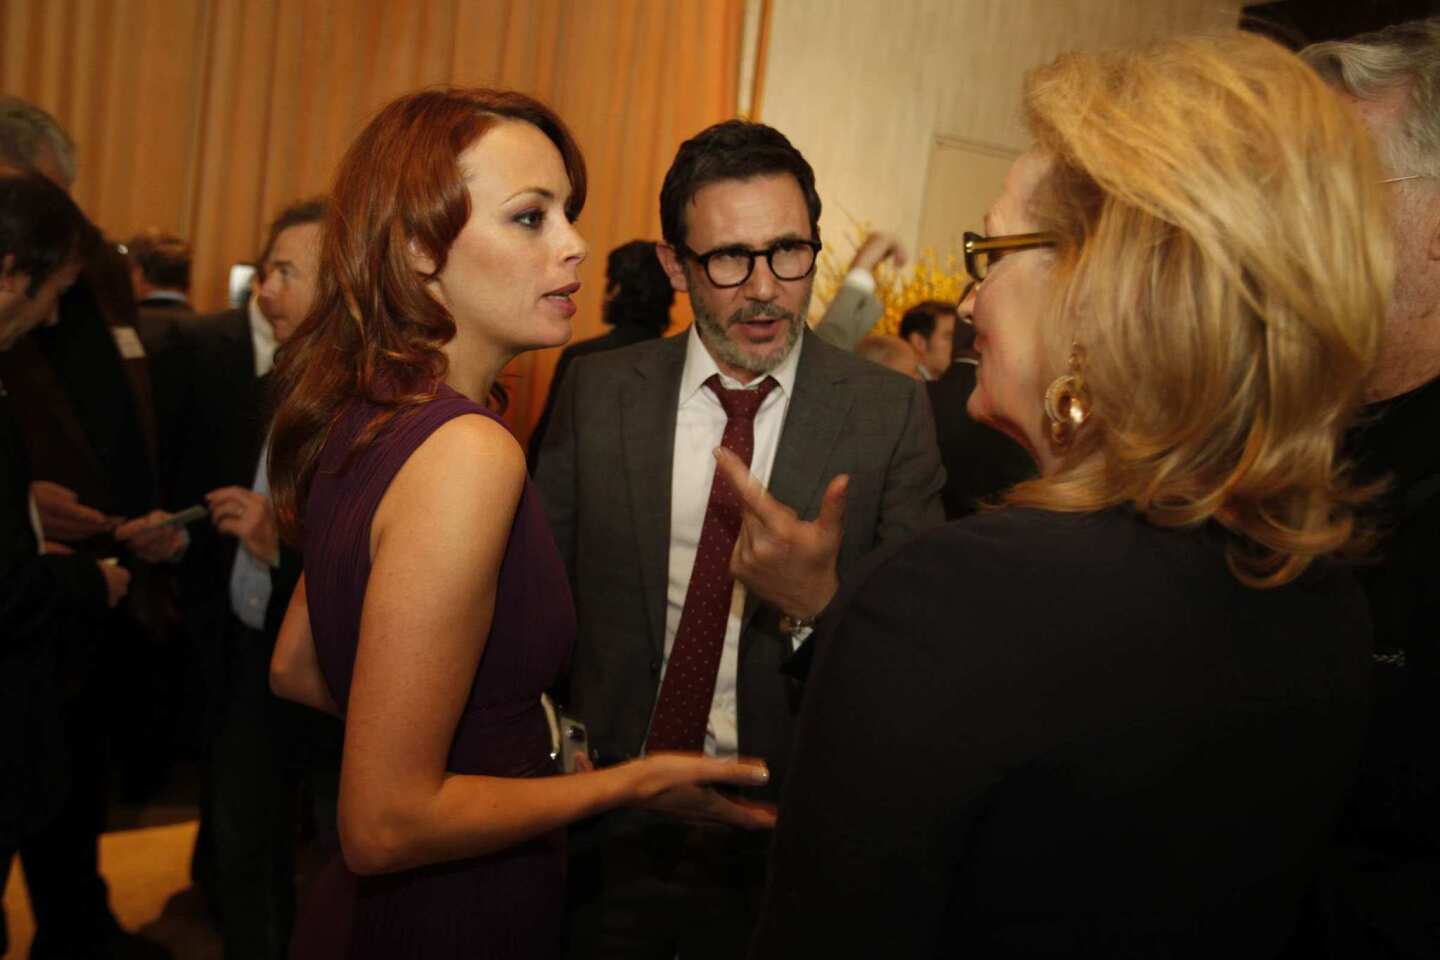 "The Artist" nominees Bérénice Bejo and director husband Michel Hazanavicius talk to "The Iron Lady" nominee Meryl Streep.